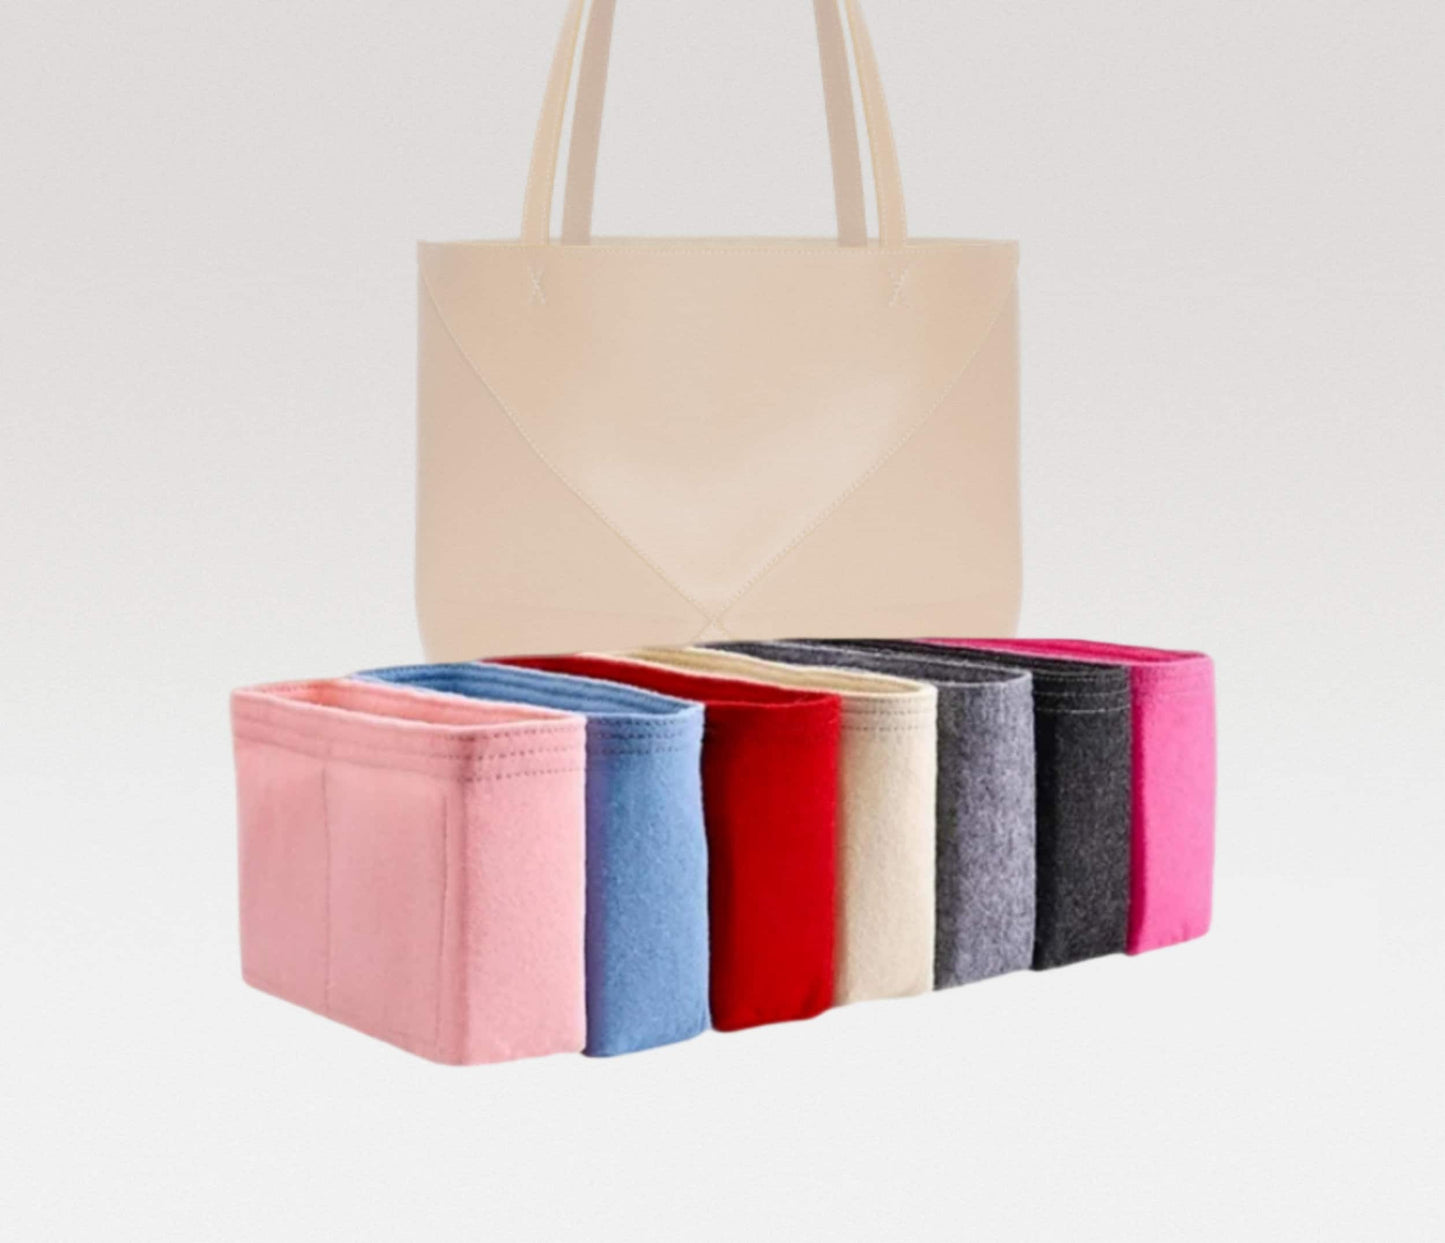 Bag Organizer For Puzzle Fold Tote | Bag Insert For Tote Bag | Felt Bag Organizer For Handbag Bag